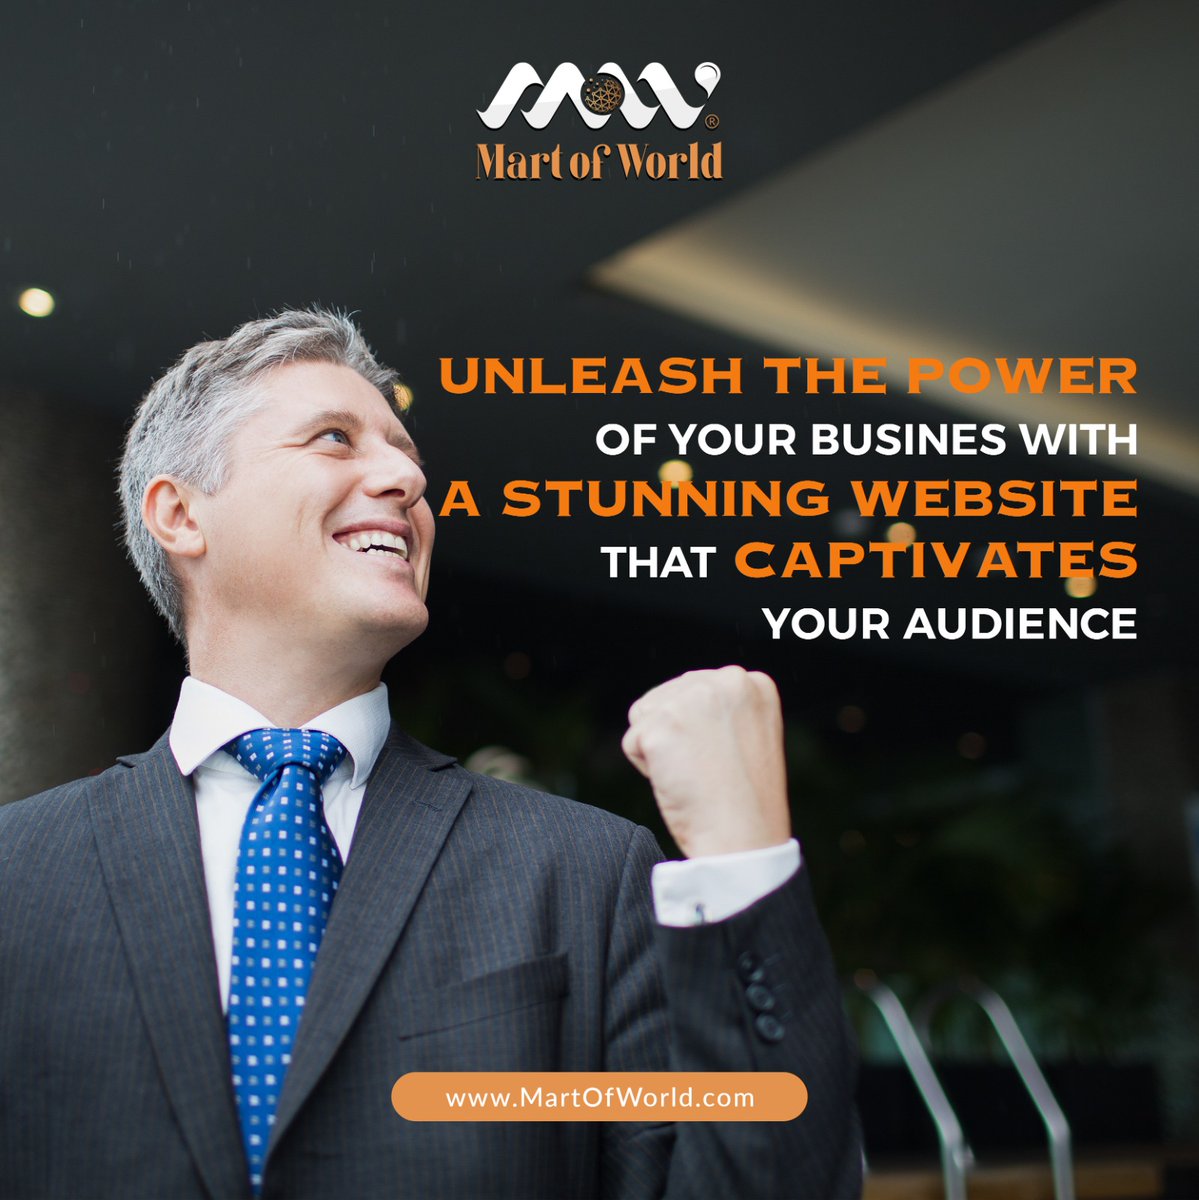 Unleash the power of your business with a stunning website that captivates your audience martofworld.com/company-listin
#B2BNetworking
#B2BPartnerships
#B2BSuccess
#B2BMarketing
#B2BCommerce
#B2BGrowth
#B2BStrategy
#B2BCollaboration
#B2BIndustry
#B2BRelationships
#B2BExcellence